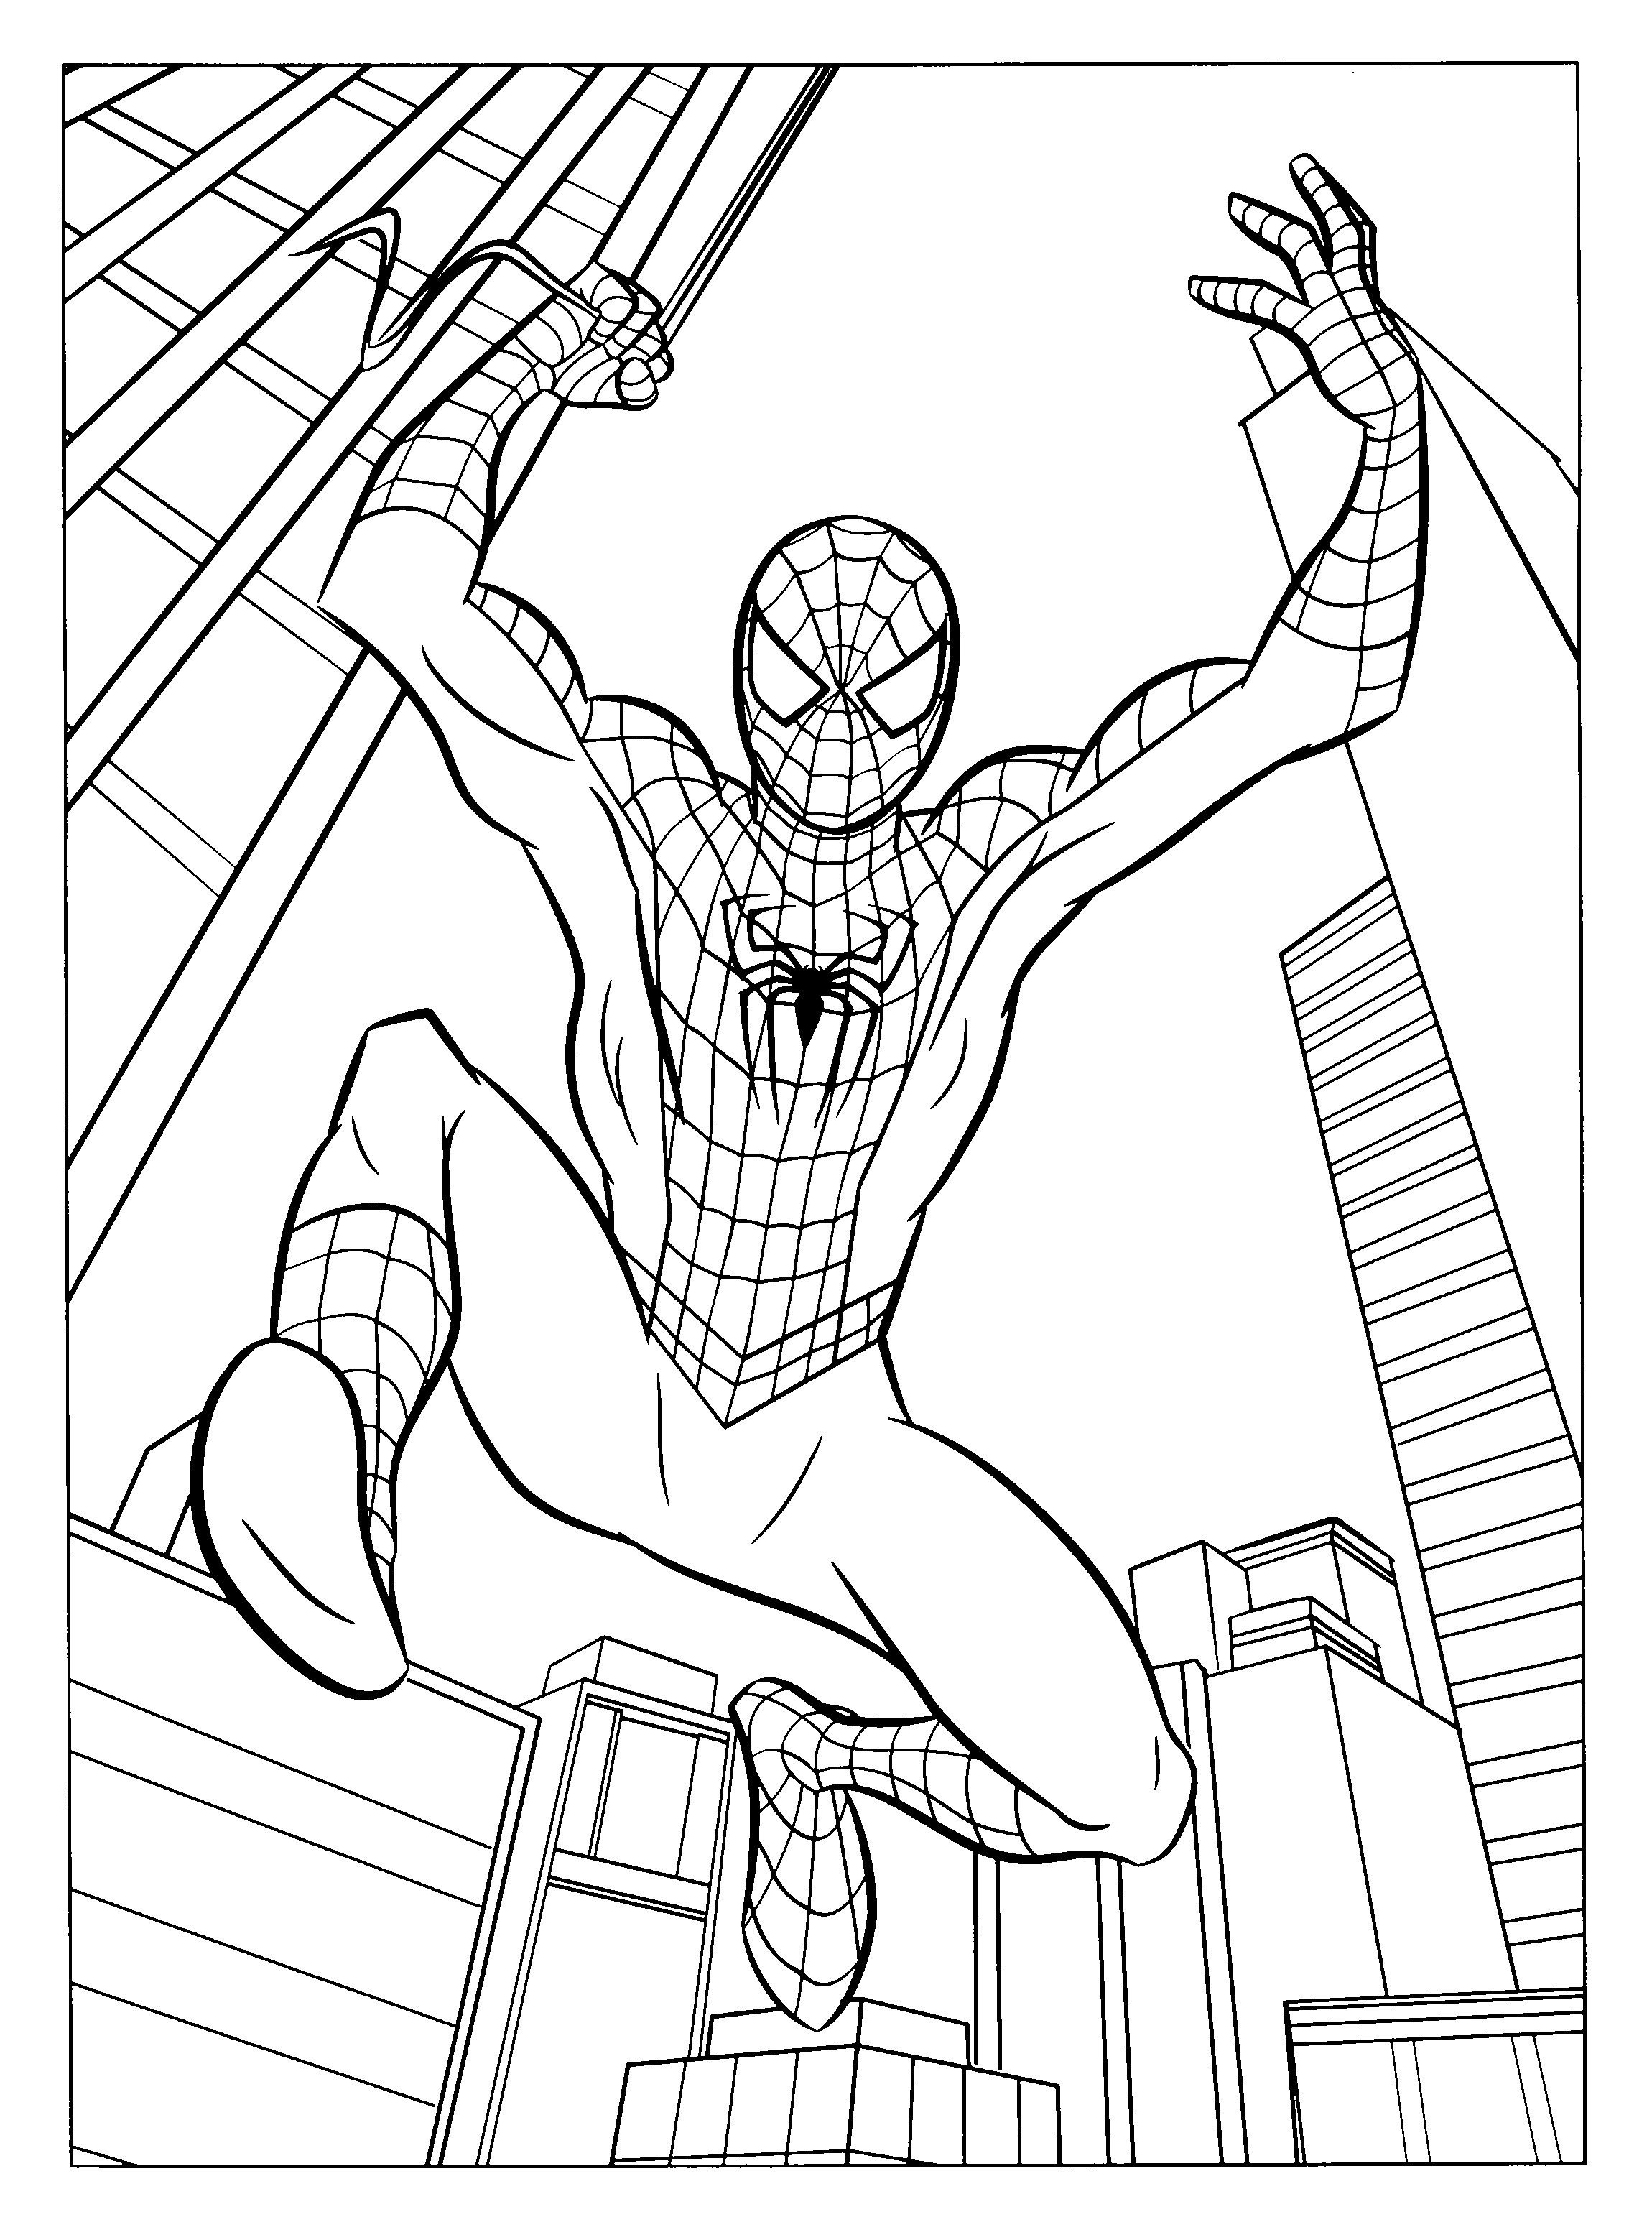 Free Printable Spiderman Coloring Pages For Kids | Noni And - Free Printable Spiderman Coloring Pages